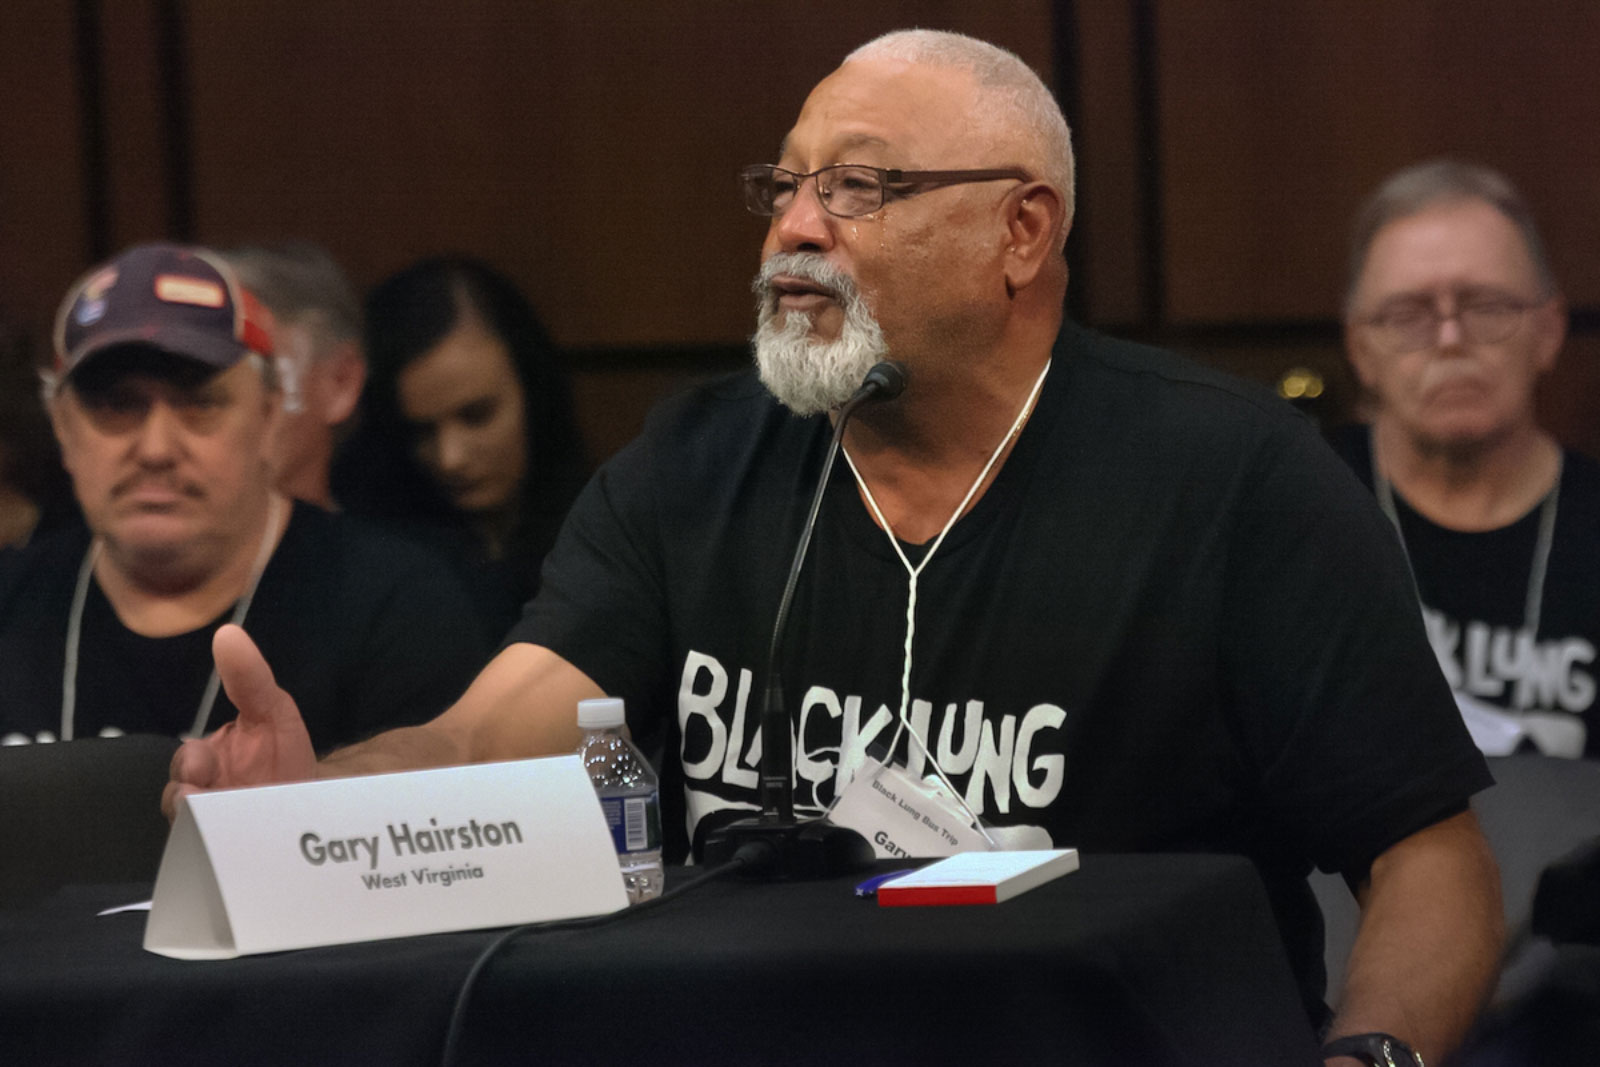 Gary Hairston of the Black Lung Association testifies at a Senate panel in 2019.